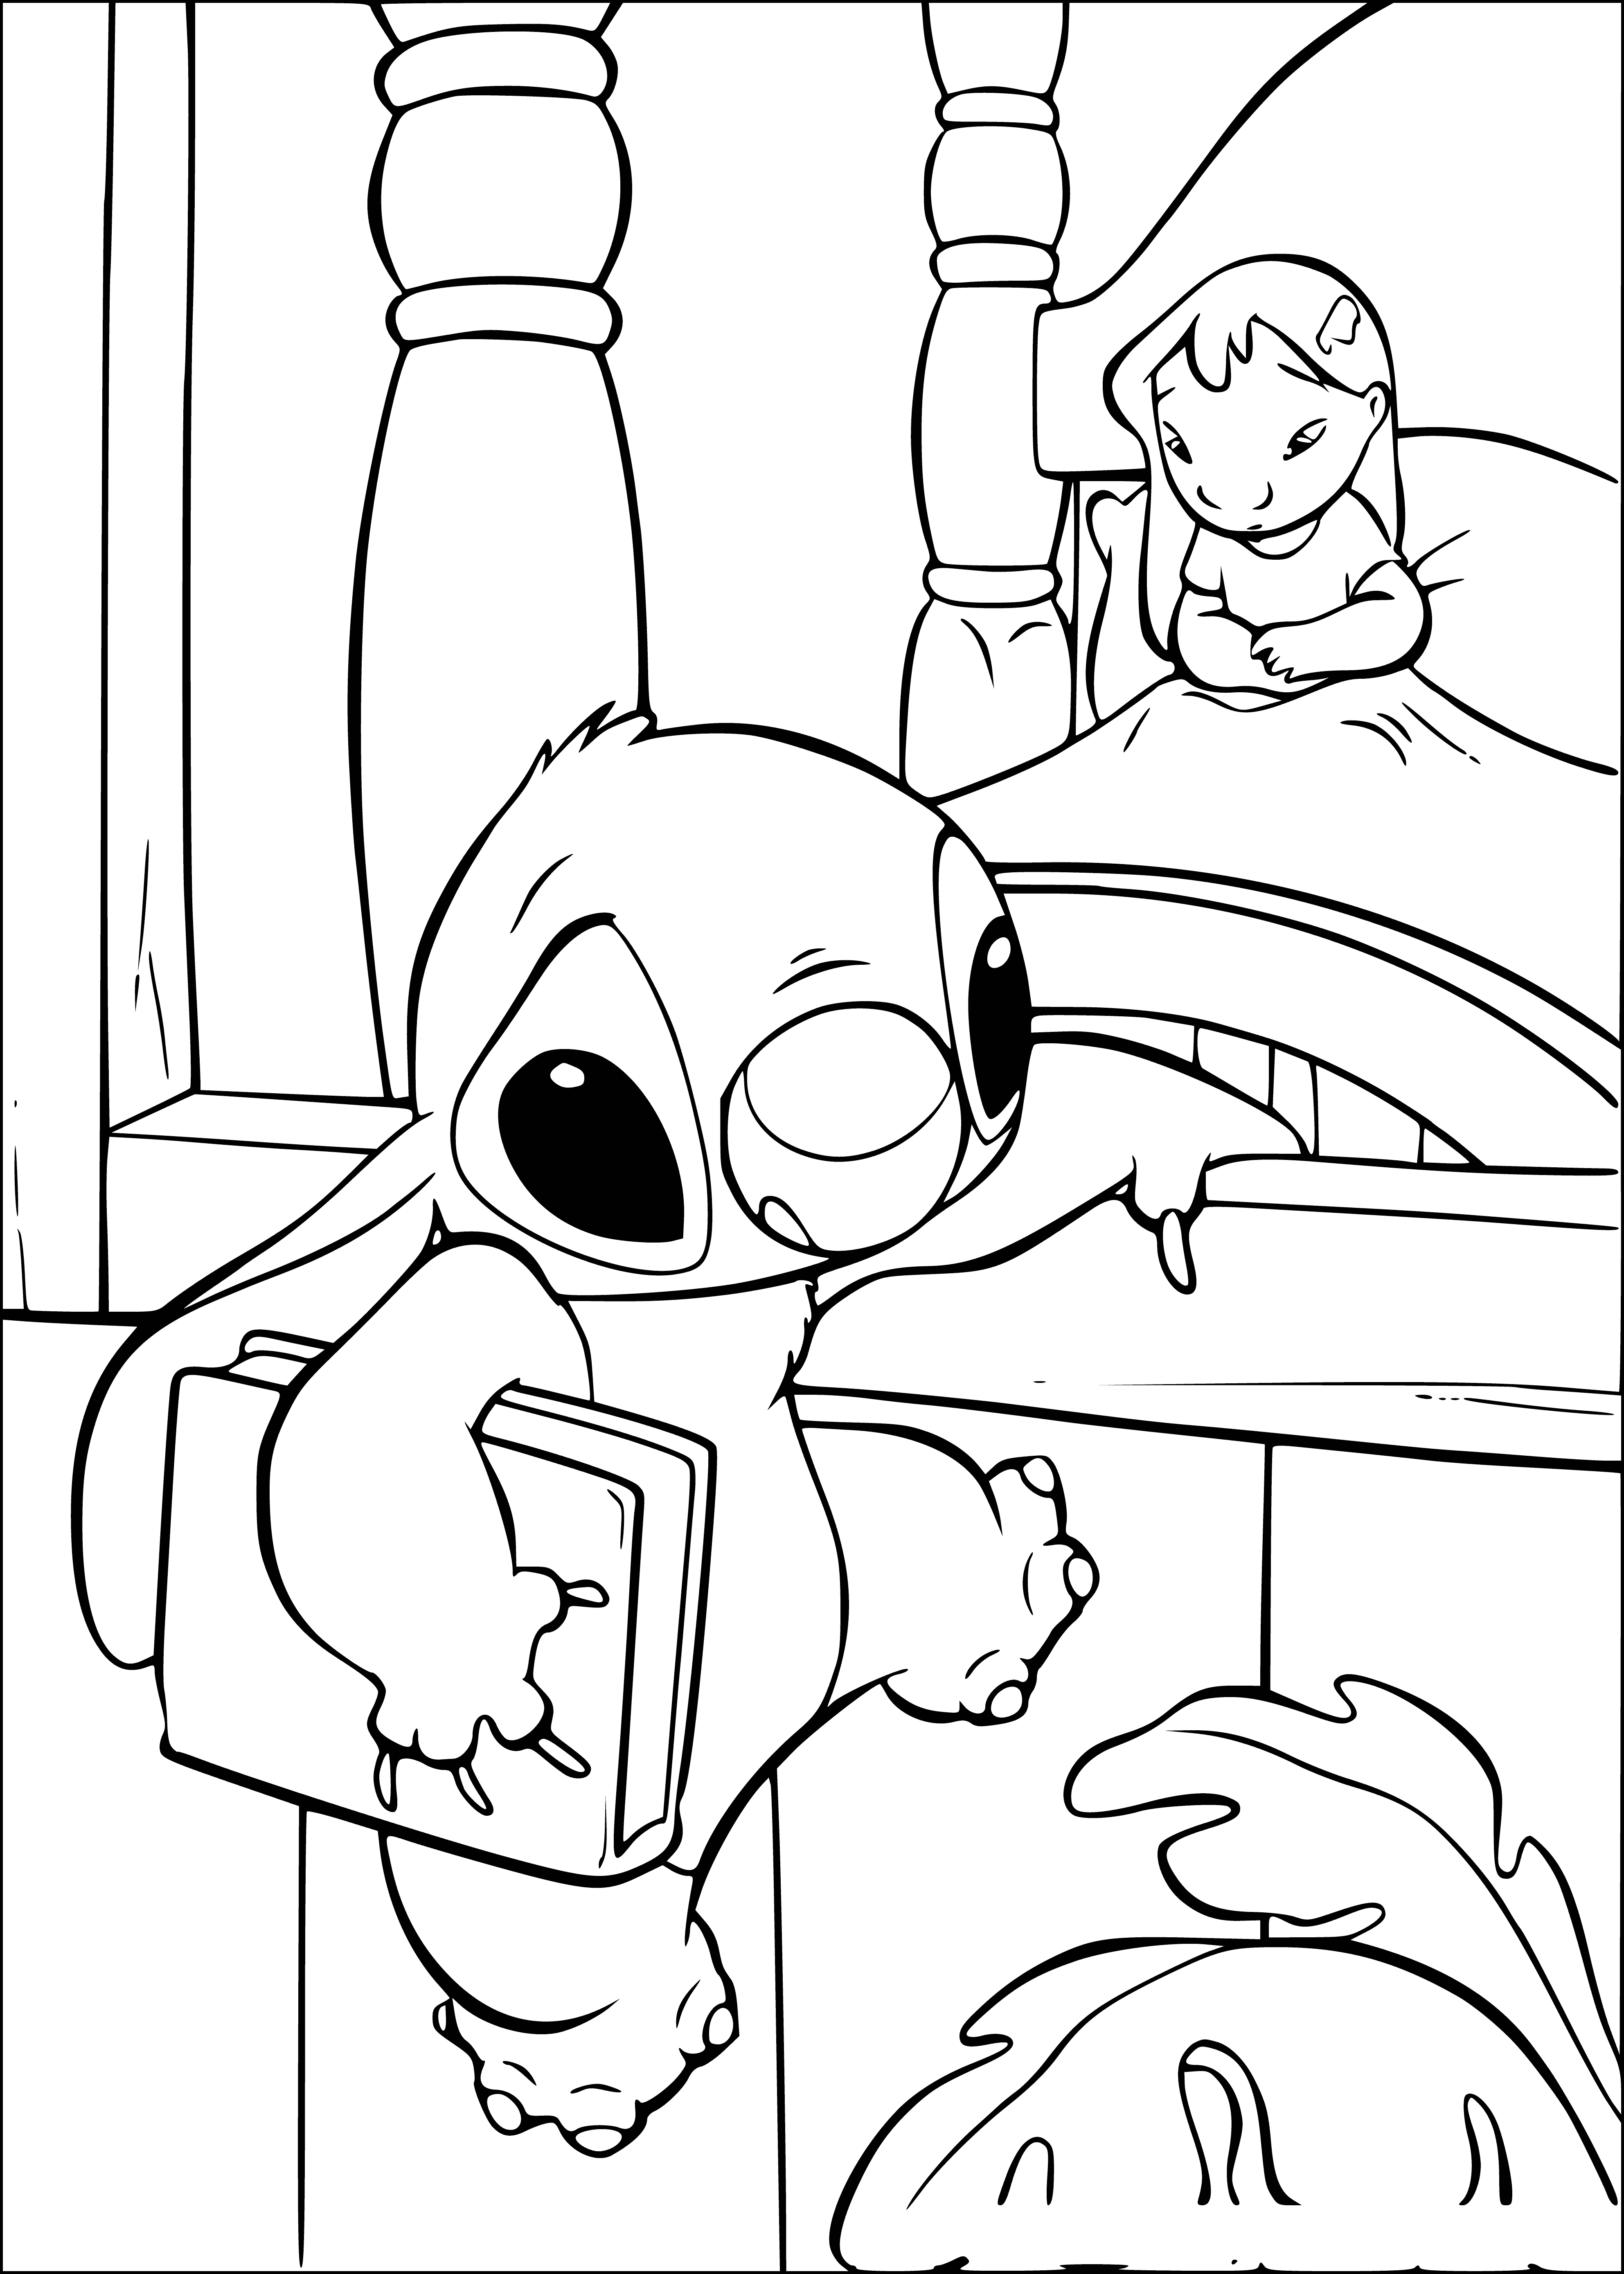 coloring page: Stitch sits on a rock, sadly gazing across the ocean, his thoughts unknown.